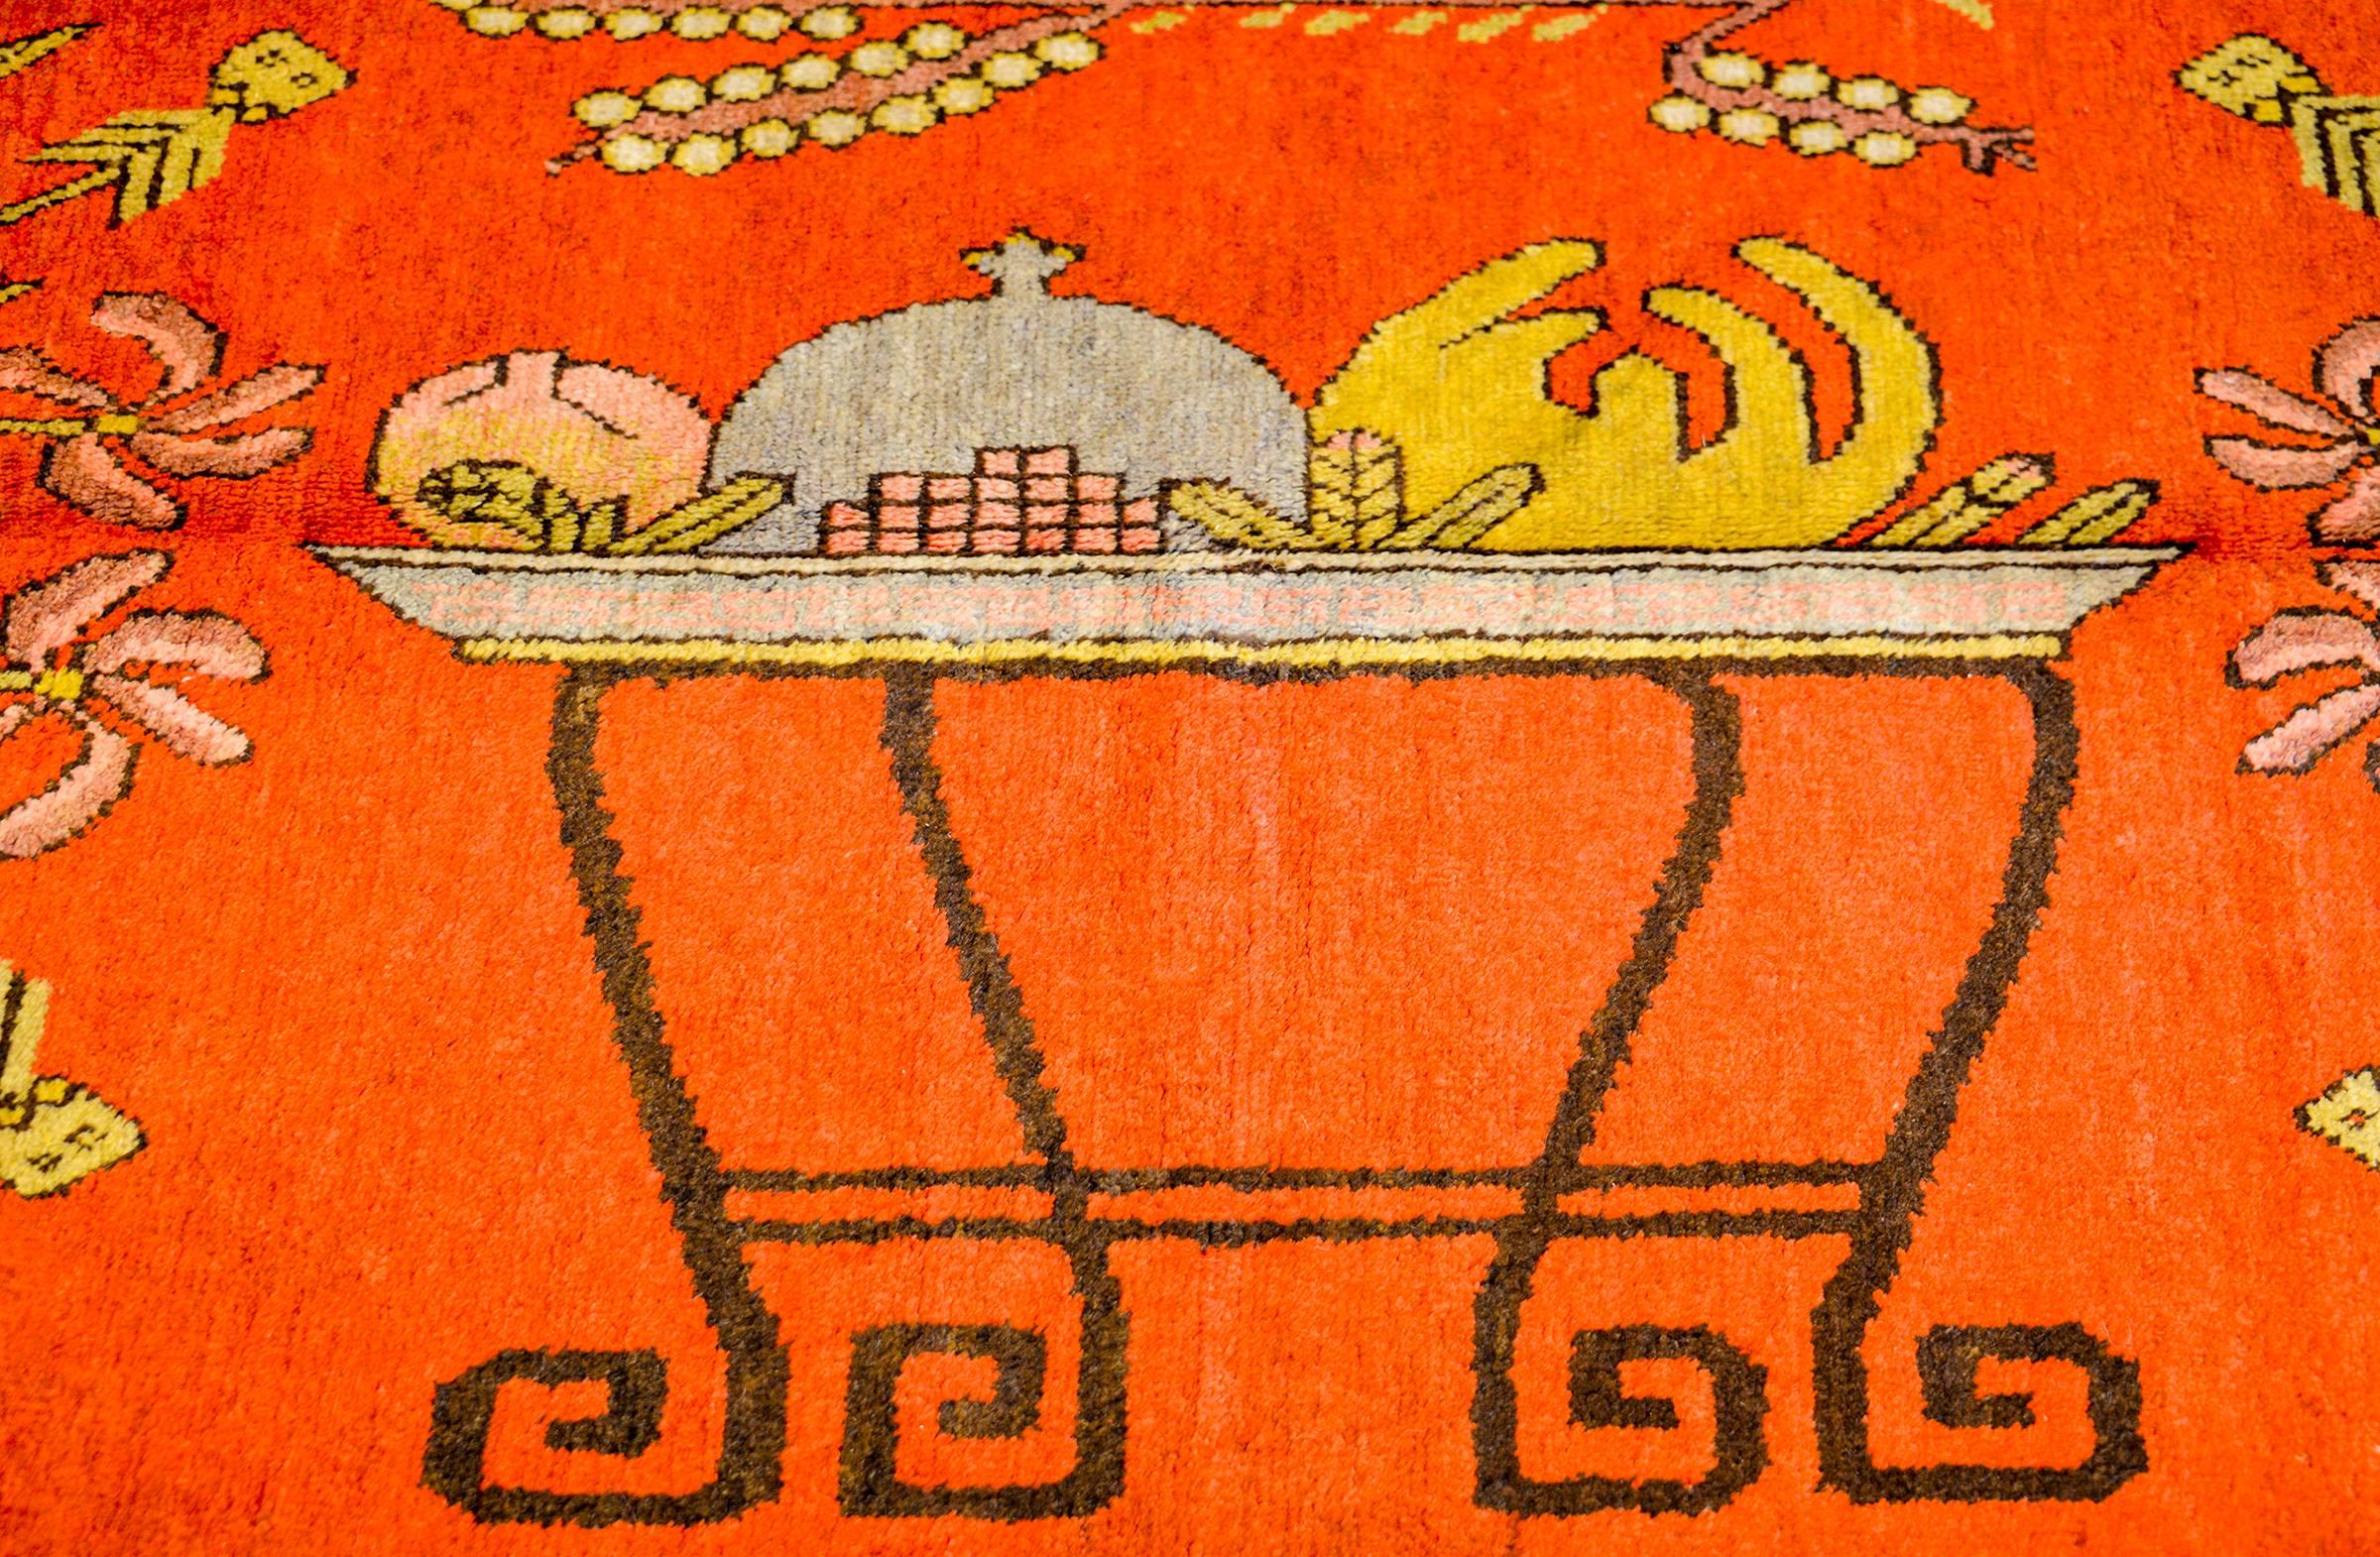 An incredible early 20th century Central Asian Khotan rug with wonderfully rendered auspicious Chinese symbols like a footed tray holding a peach, pomegranate, and citron, flanked by two blossoming lotus plants. The border is complex with multiple